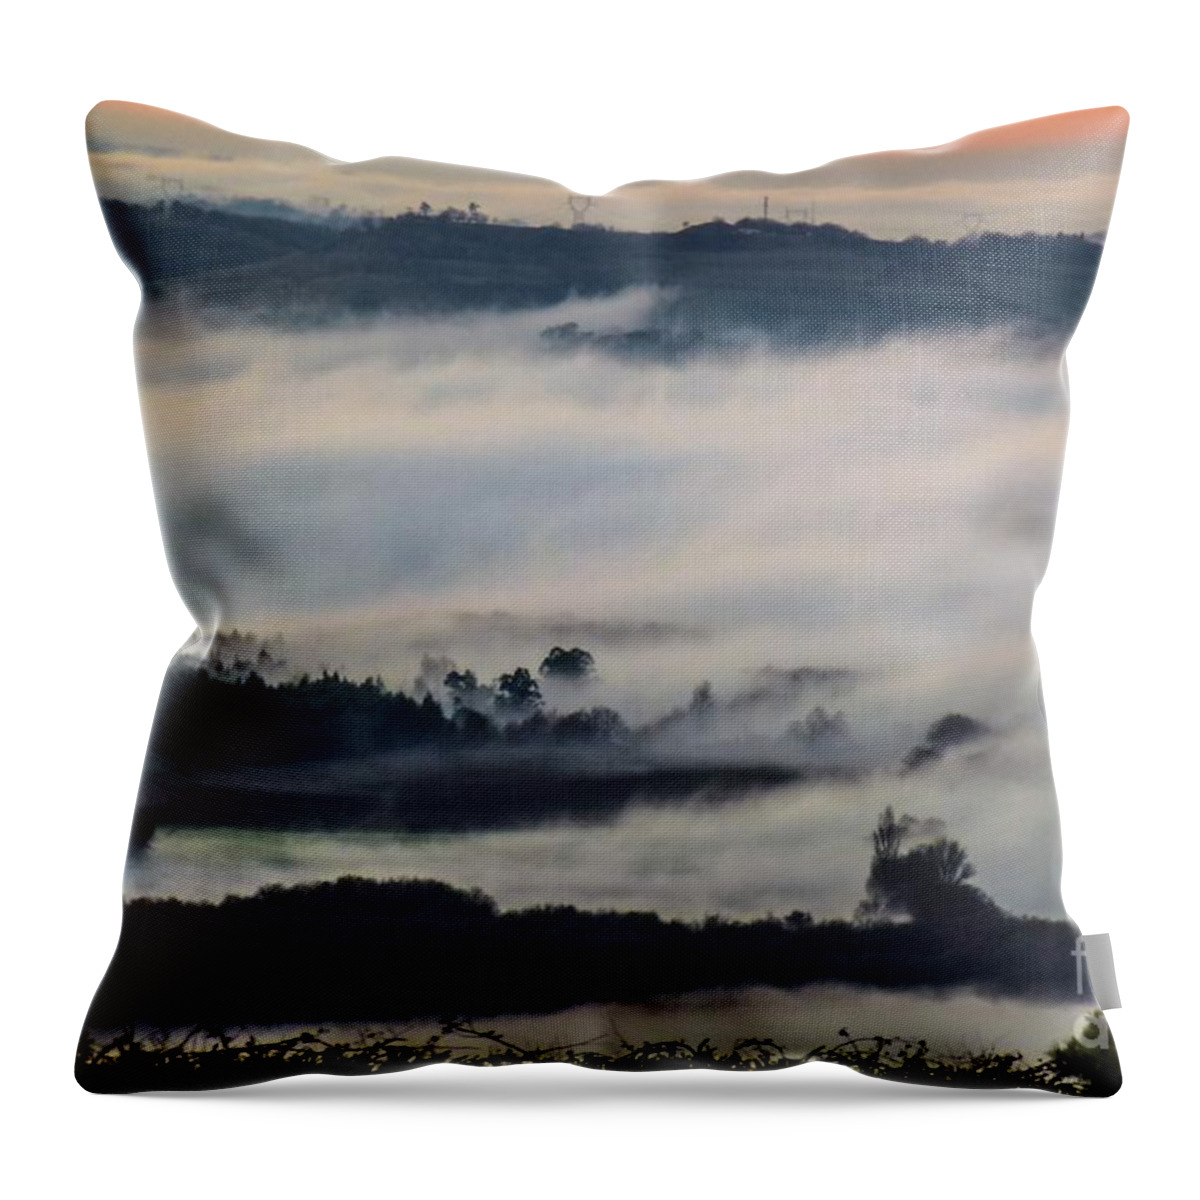 Adornment Throw Pillow featuring the photograph In the Mist 2 by Jean Bernard Roussilhe